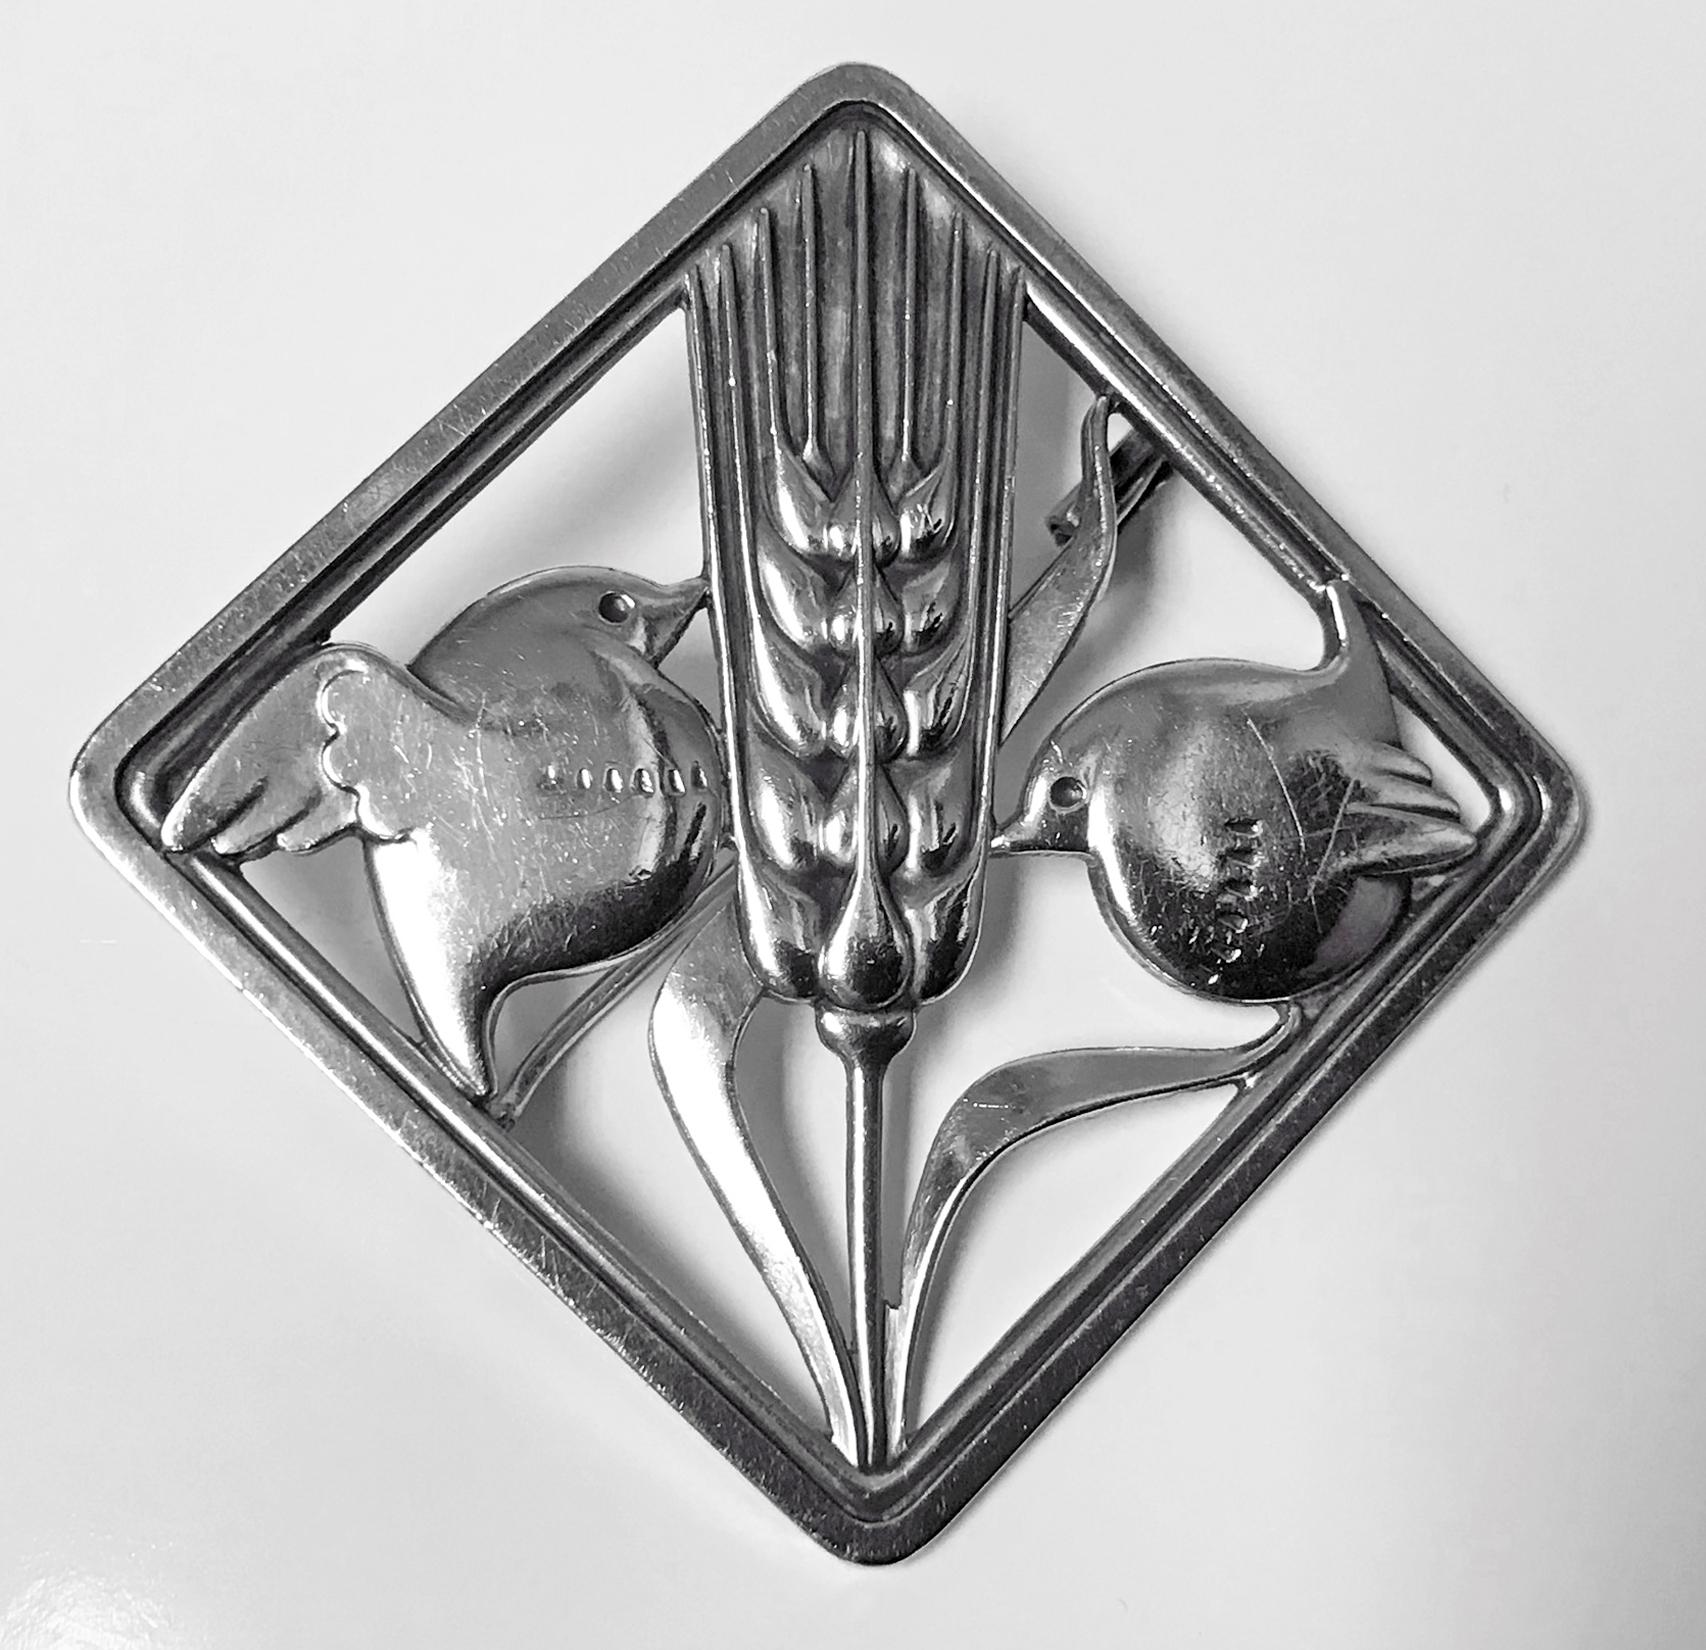 Georg Jensen Sterling Silver Birds Brooch, 1933-44. Fully hallmarked Georg Jensen GJ in box , 925 Sterling Denmark and design number 250. Designed by Arno Malinowski for Georg Jensen. The brooch of quadrilateral shape depicting two birds with branch